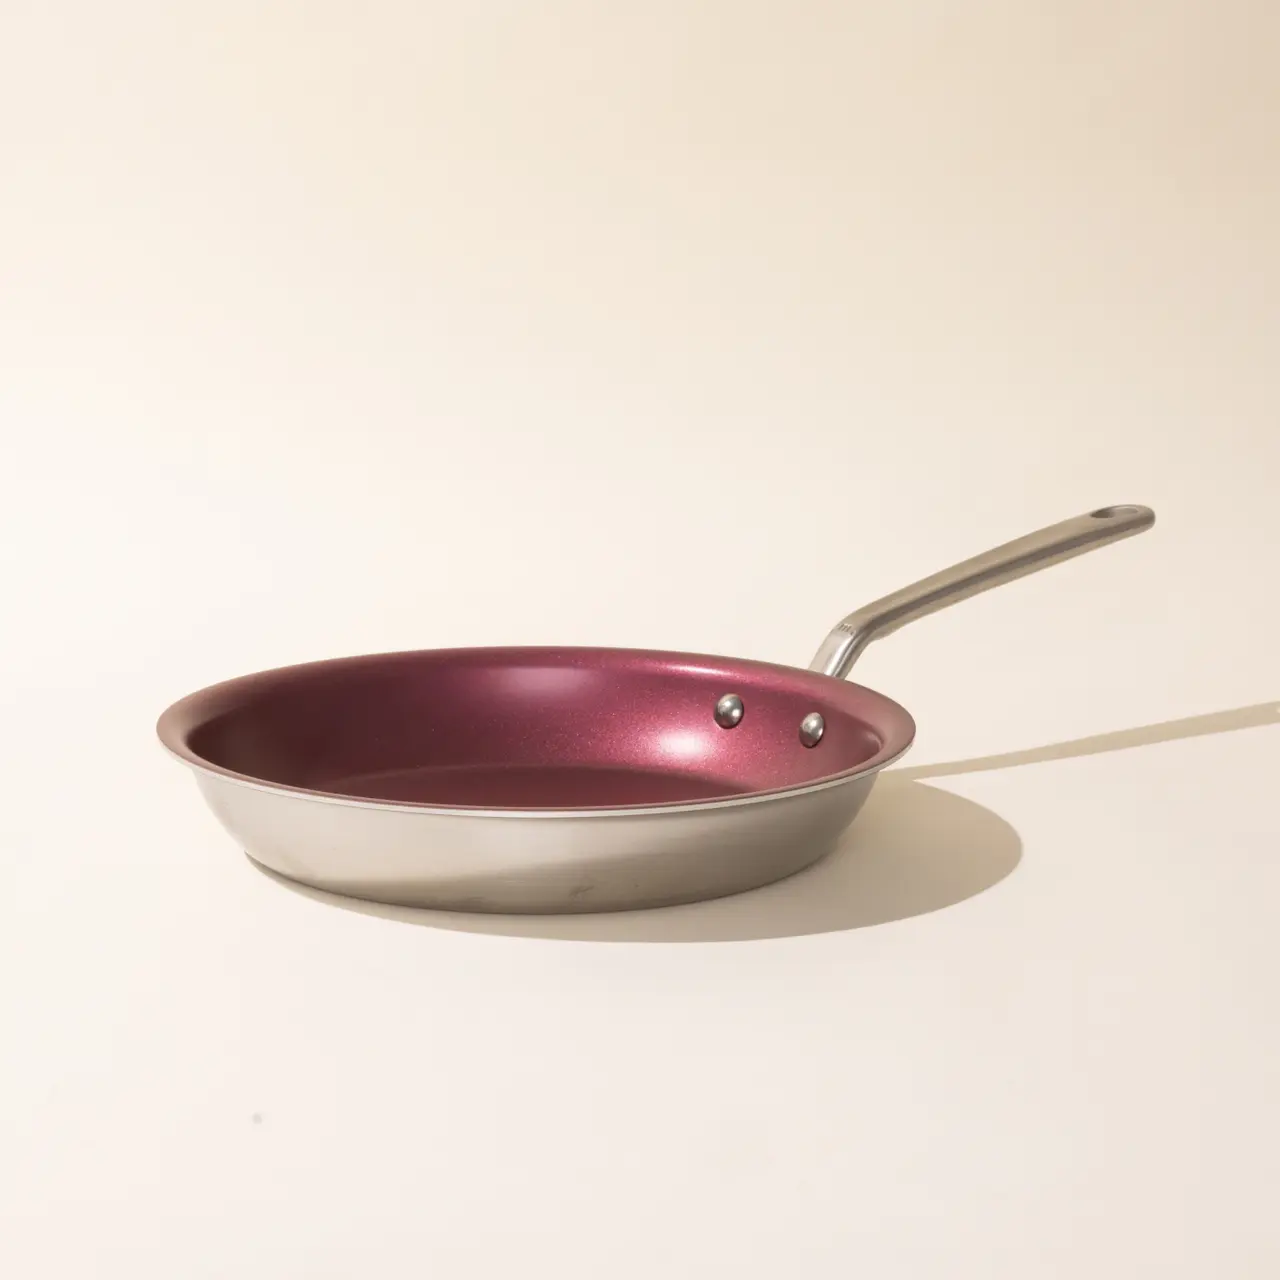 A pink non-stick frying pan with a silver handle on a pale background, casting a soft shadow.